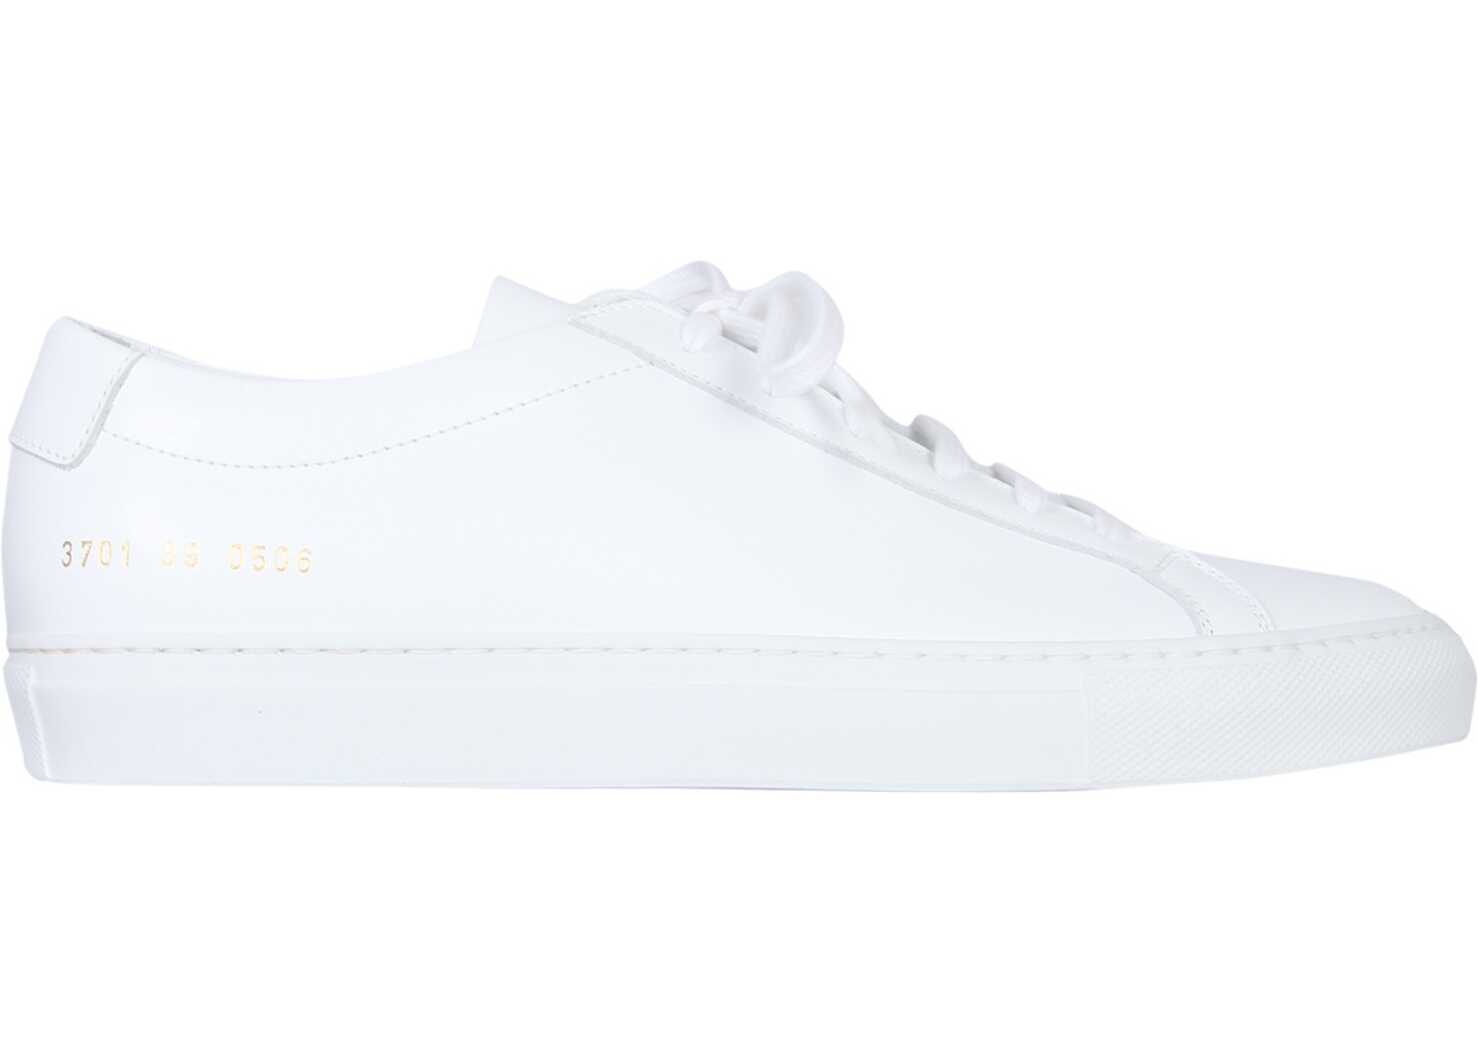 Common Projects Original Achilles Low Sneakers 3701_0506 WHITE